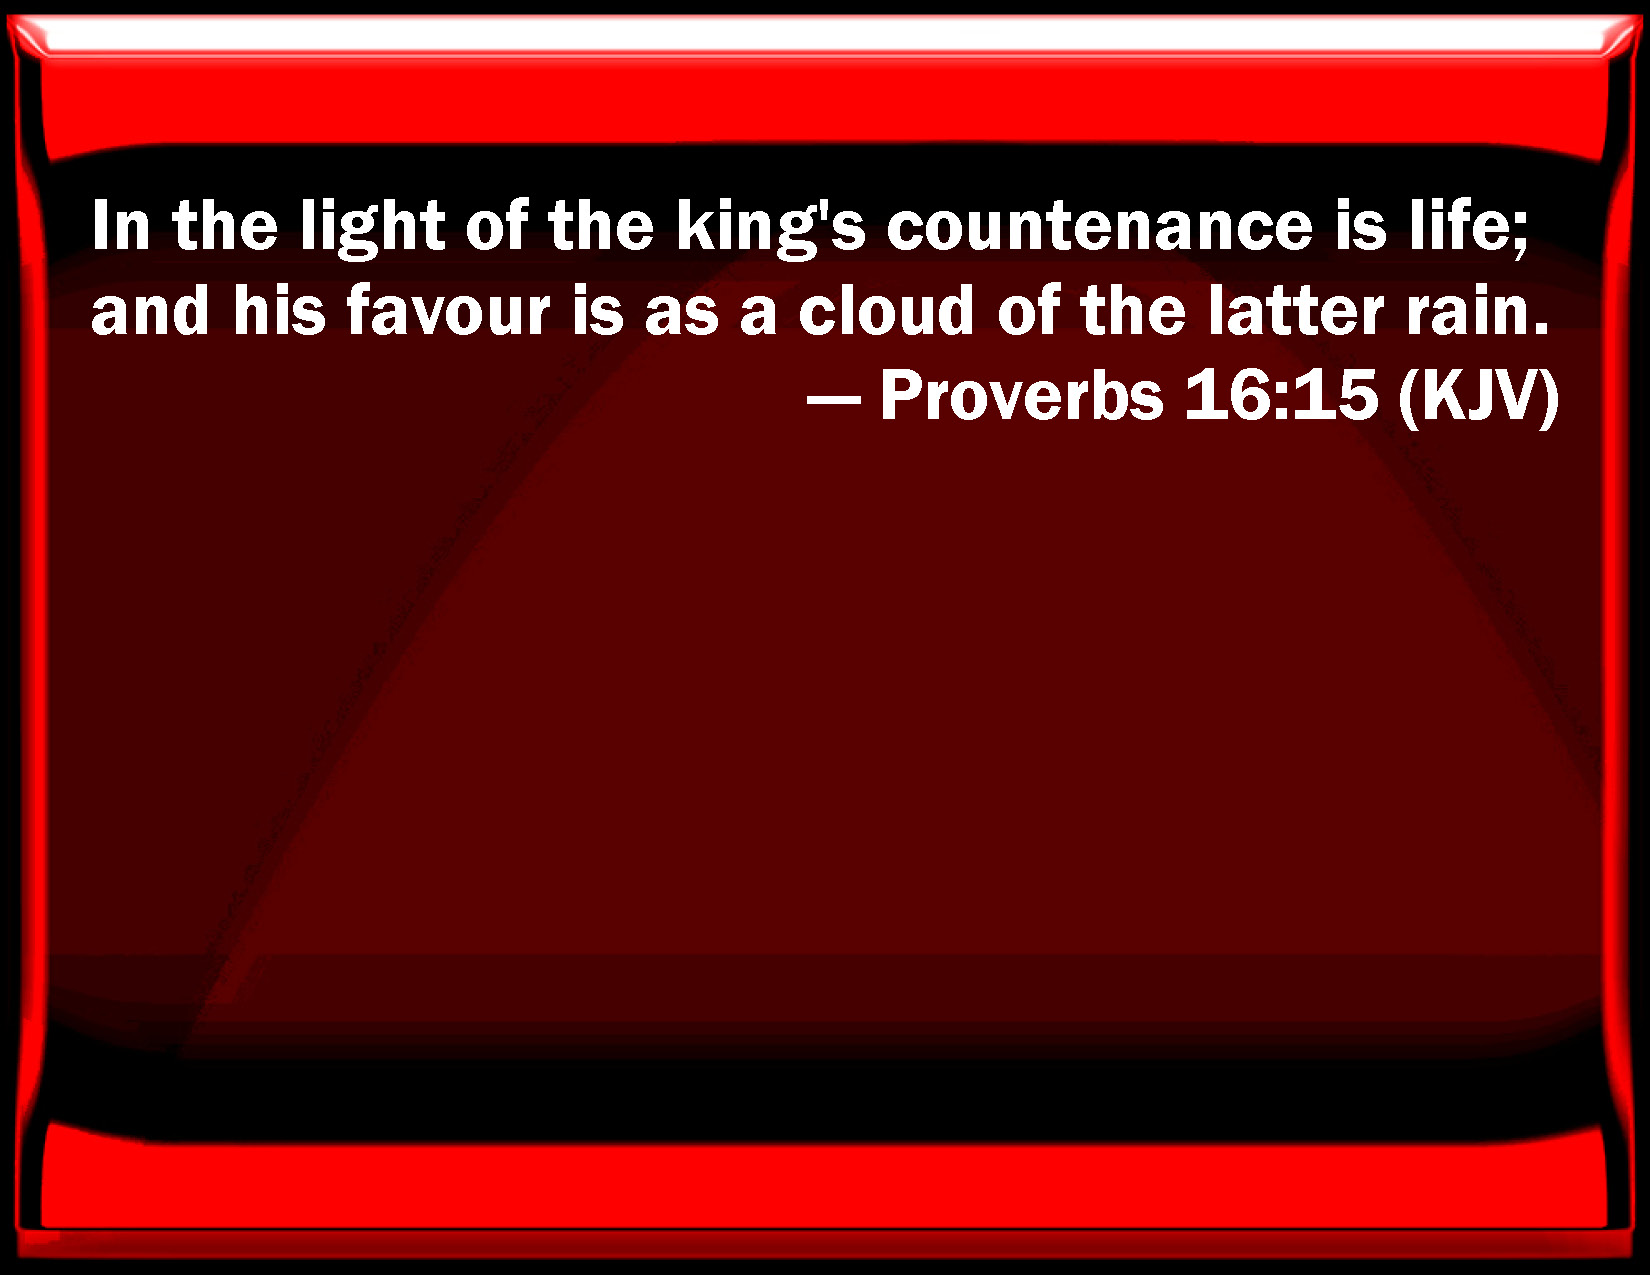 proverbs-16-15-in-the-light-of-the-king-s-countenance-is-life-and-his